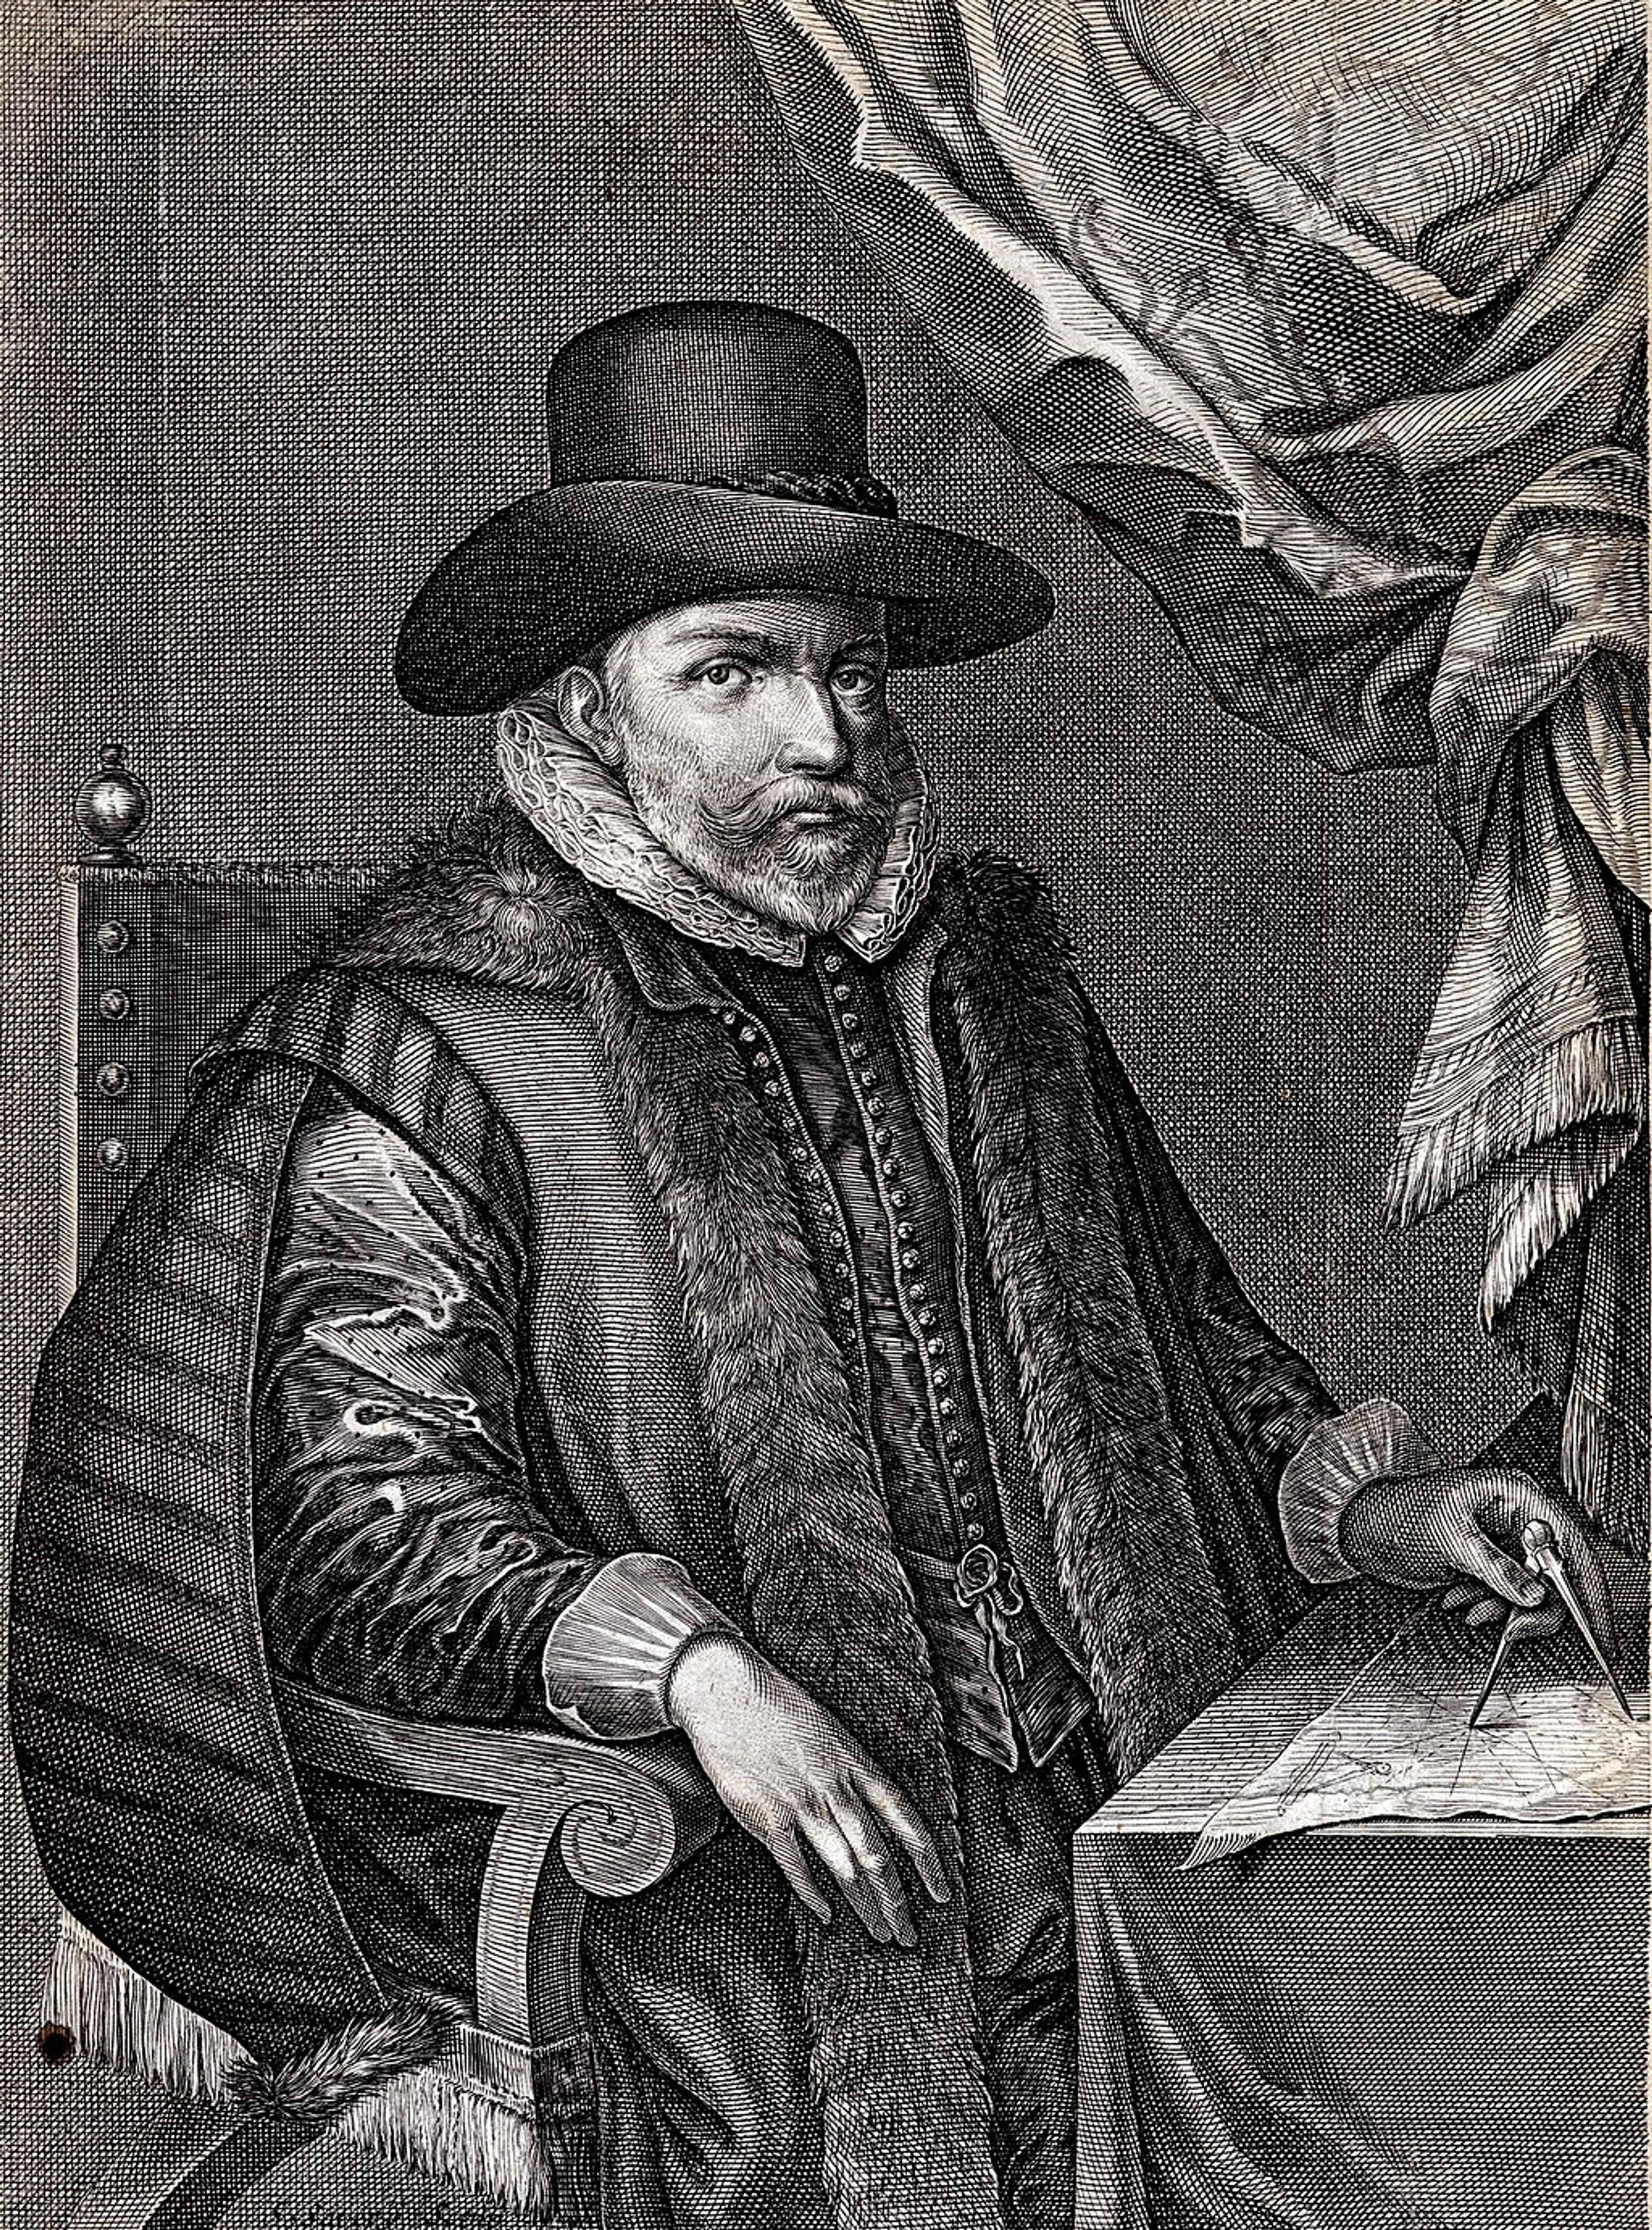 Black and white portrait of English cartographer, John Speed, a man wearing robes with a hat and holding a compass over a map in his left hand.